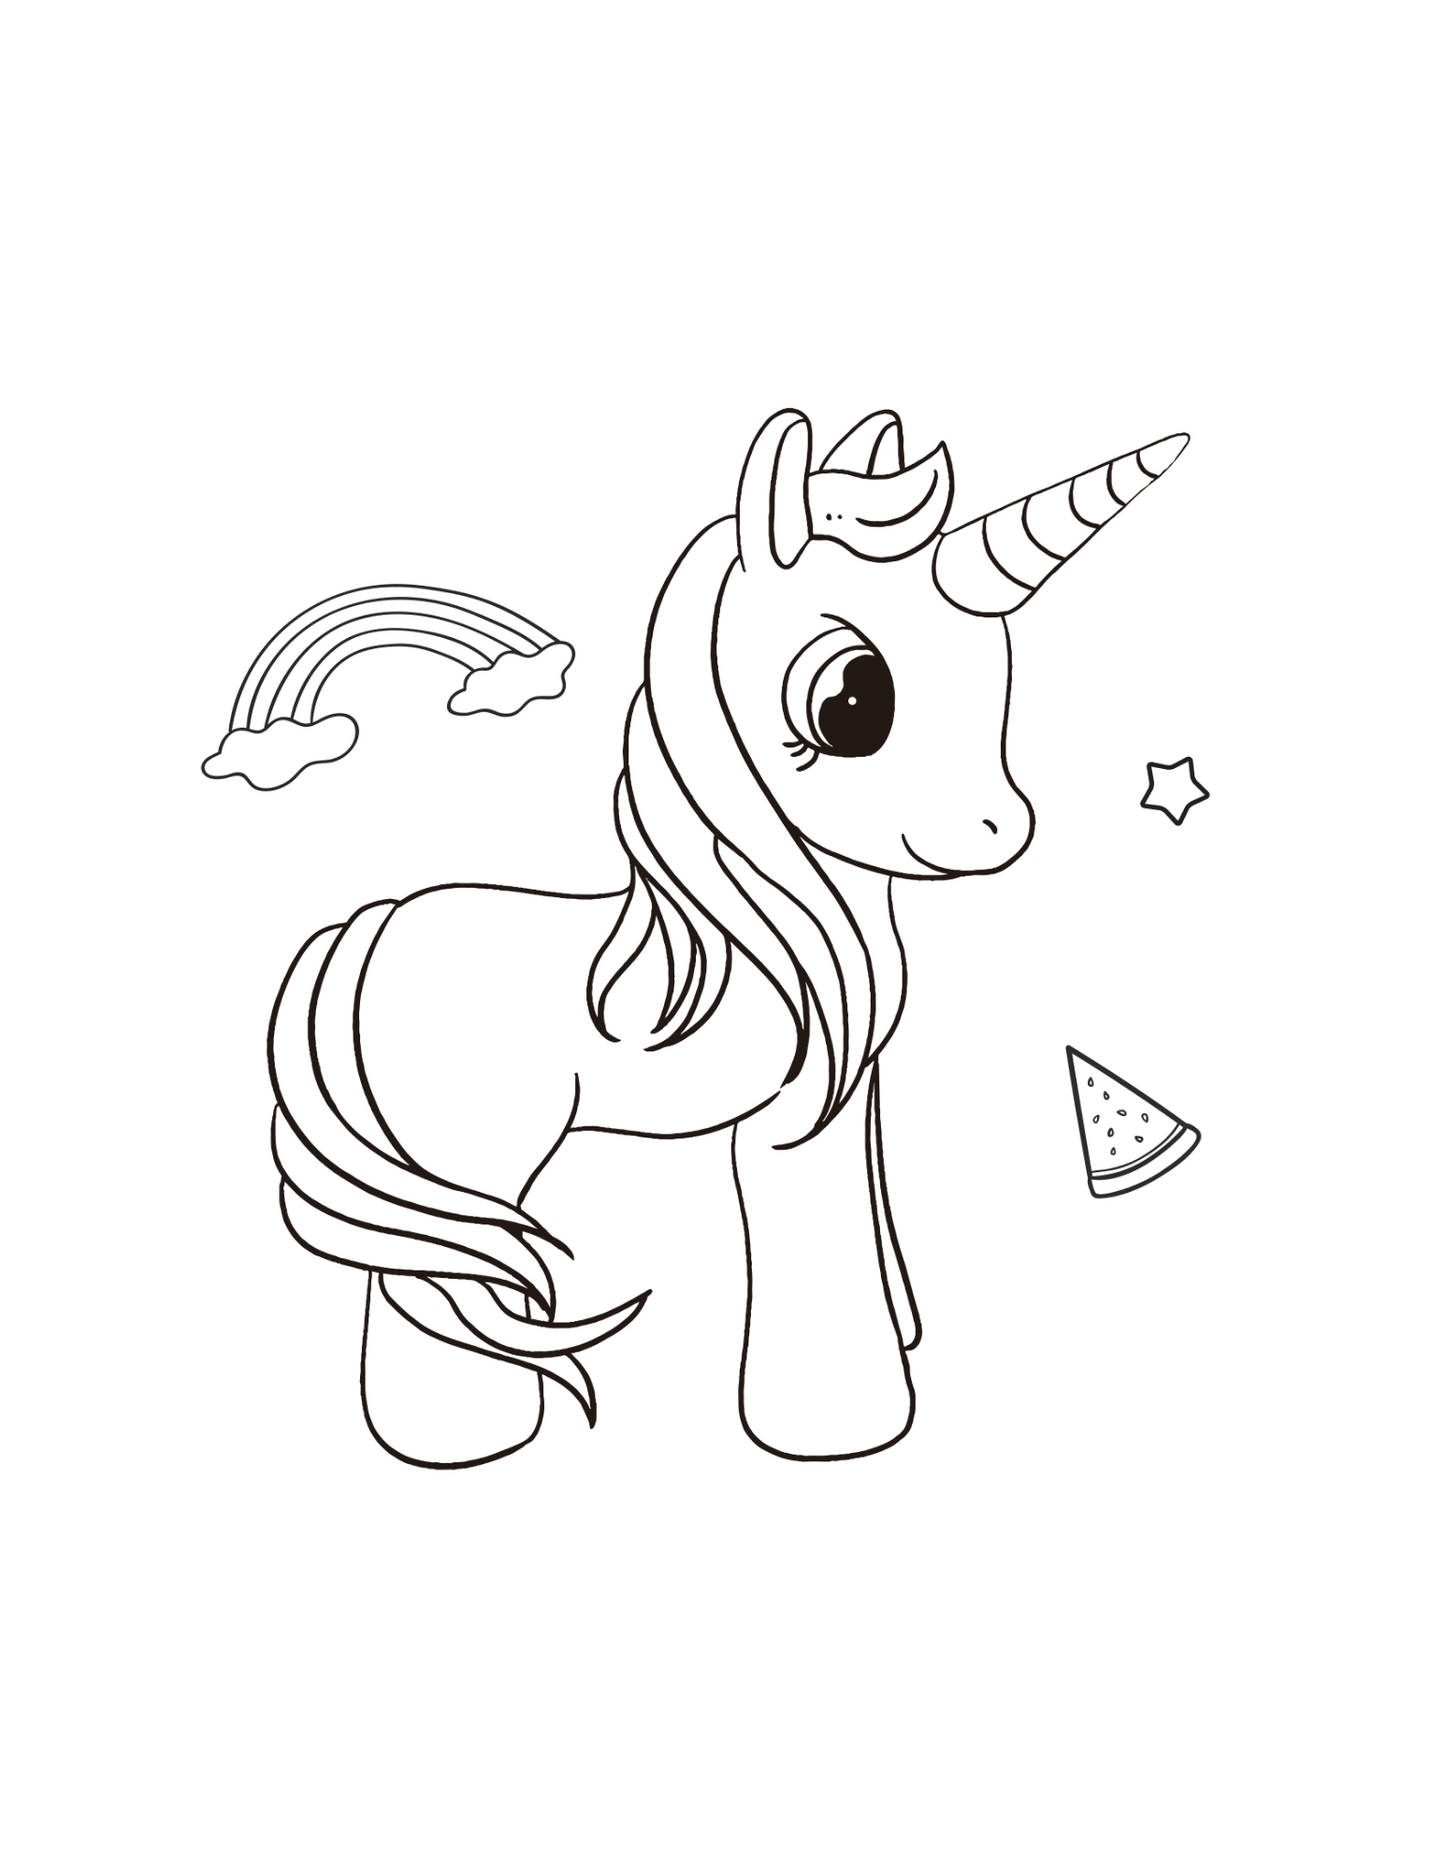 Unicorn Games and Coloring Pages with Solutions (92 Pages Total)